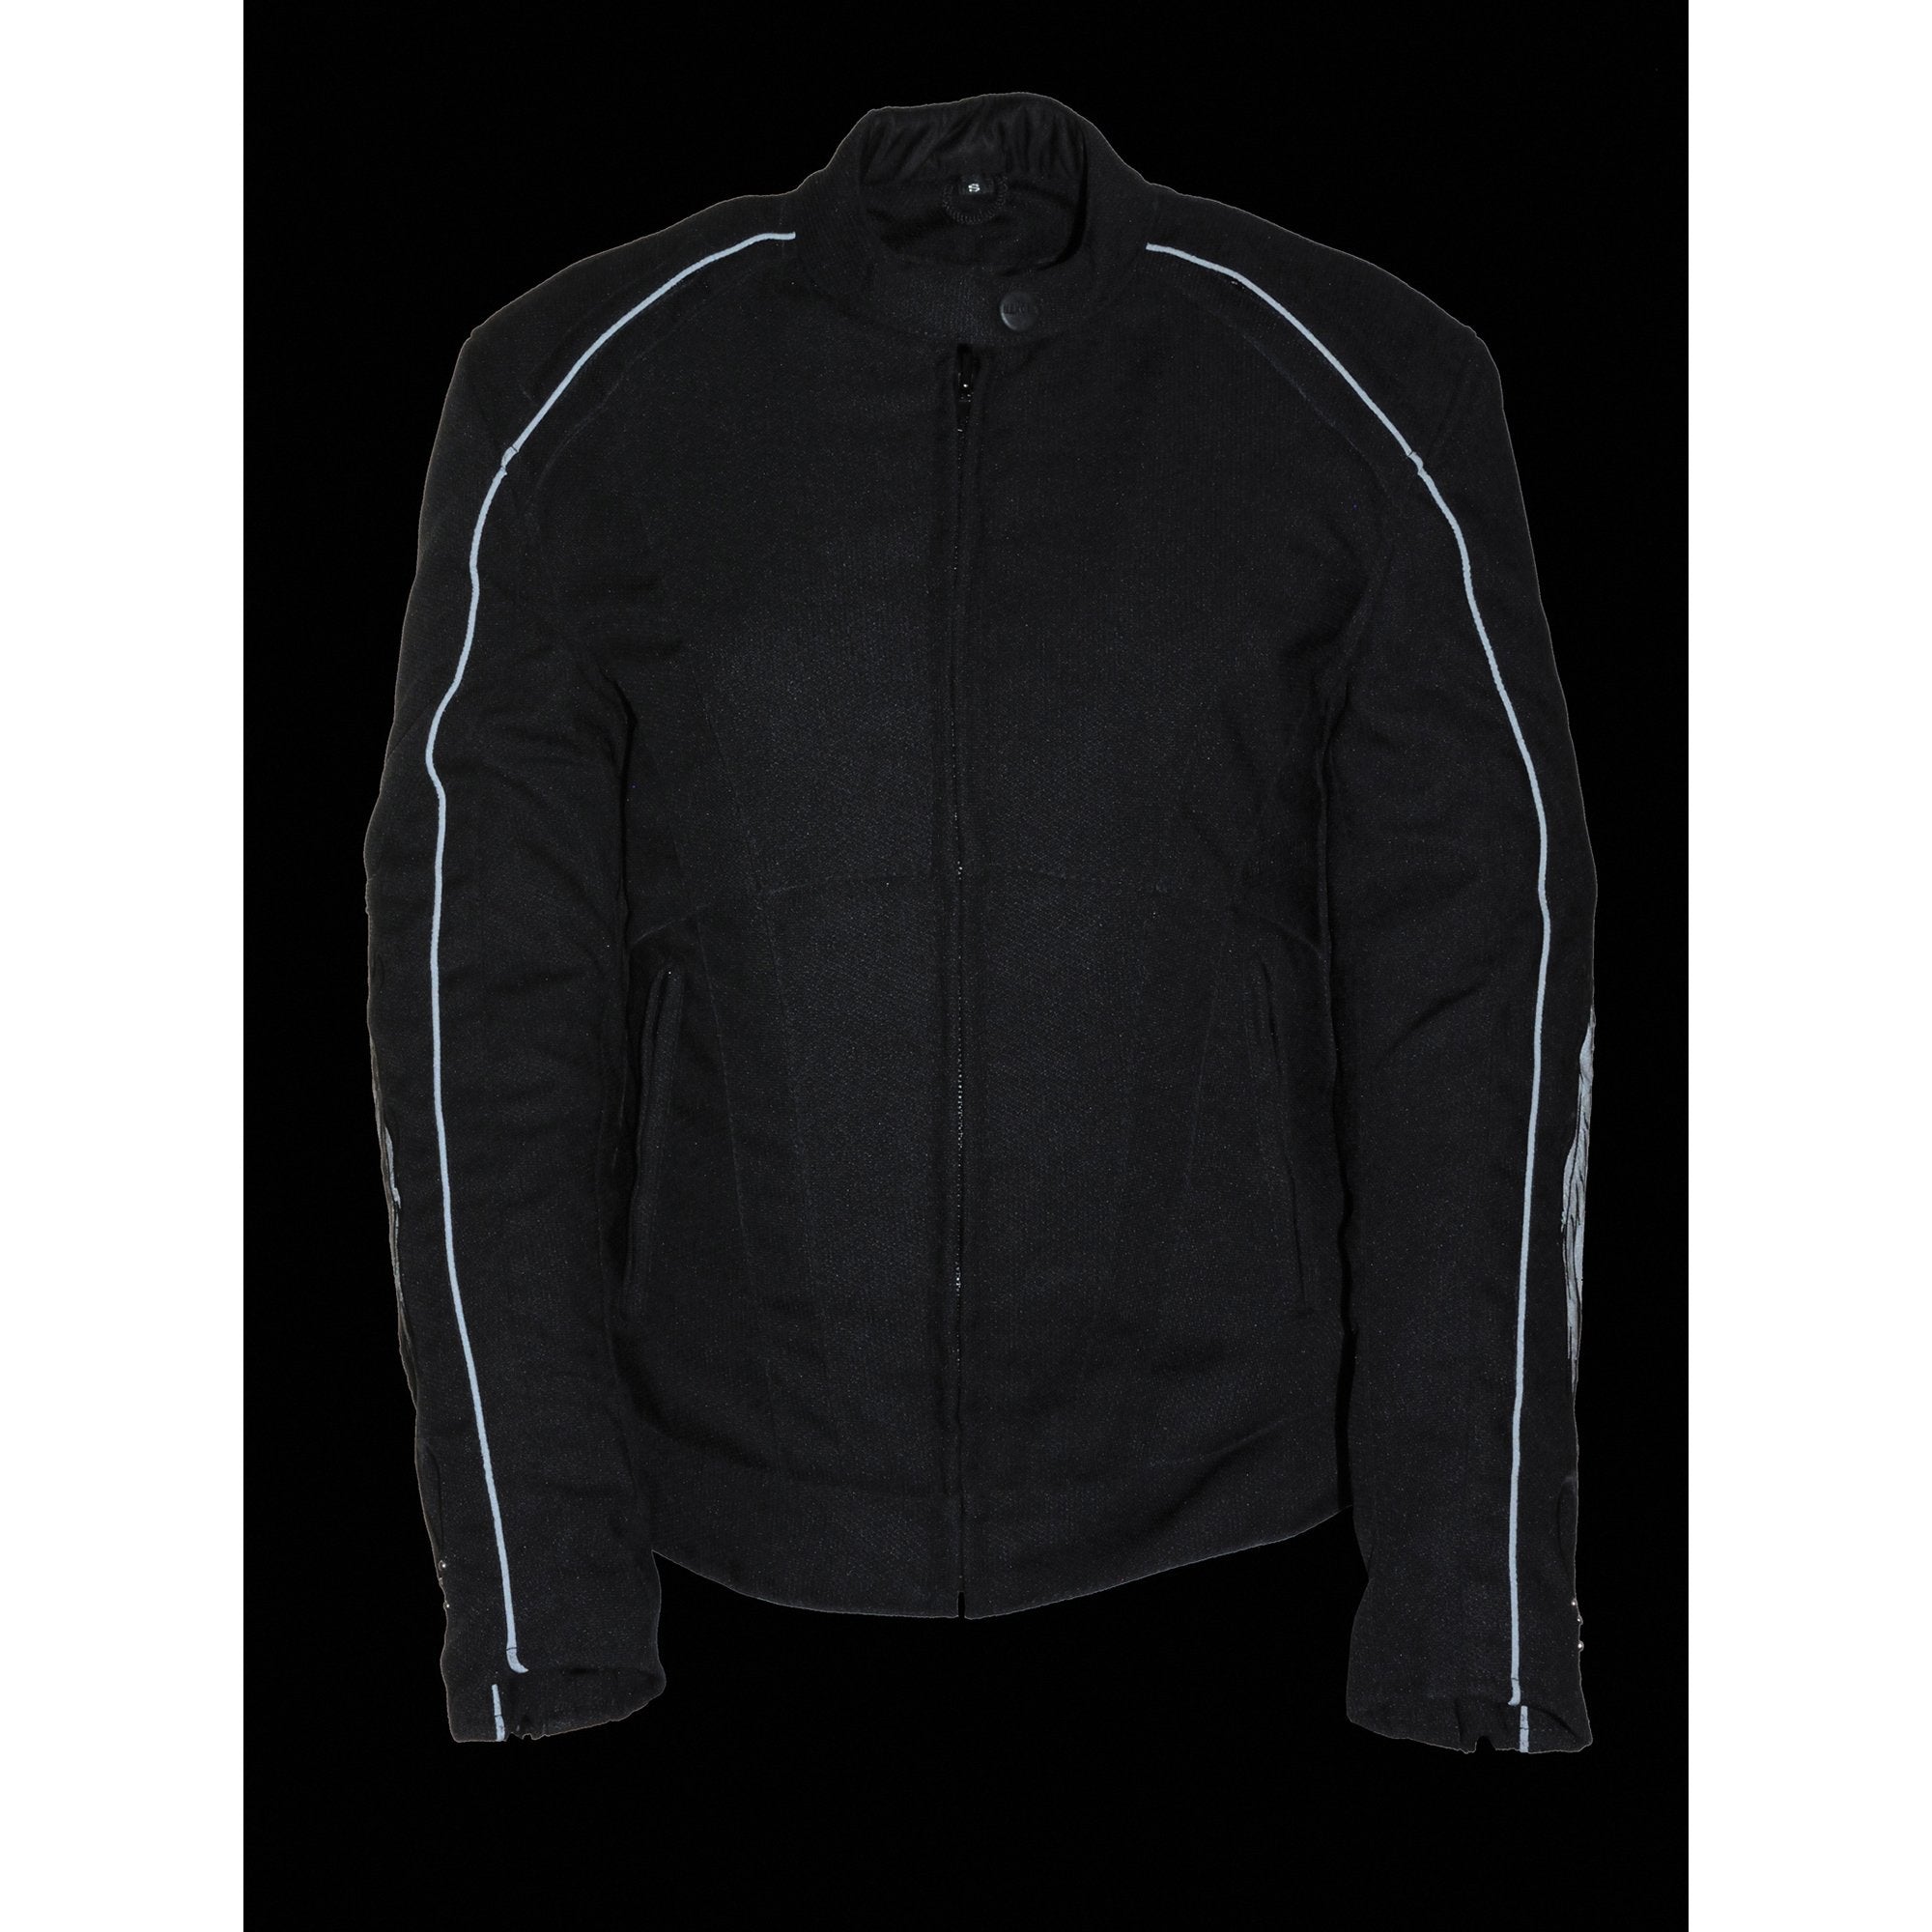 Milwaukee Performance SH1954 Women's Black Textile Jacket with Stud and Wings Detailing - Milwaukee Performance Womens Textile Jackets